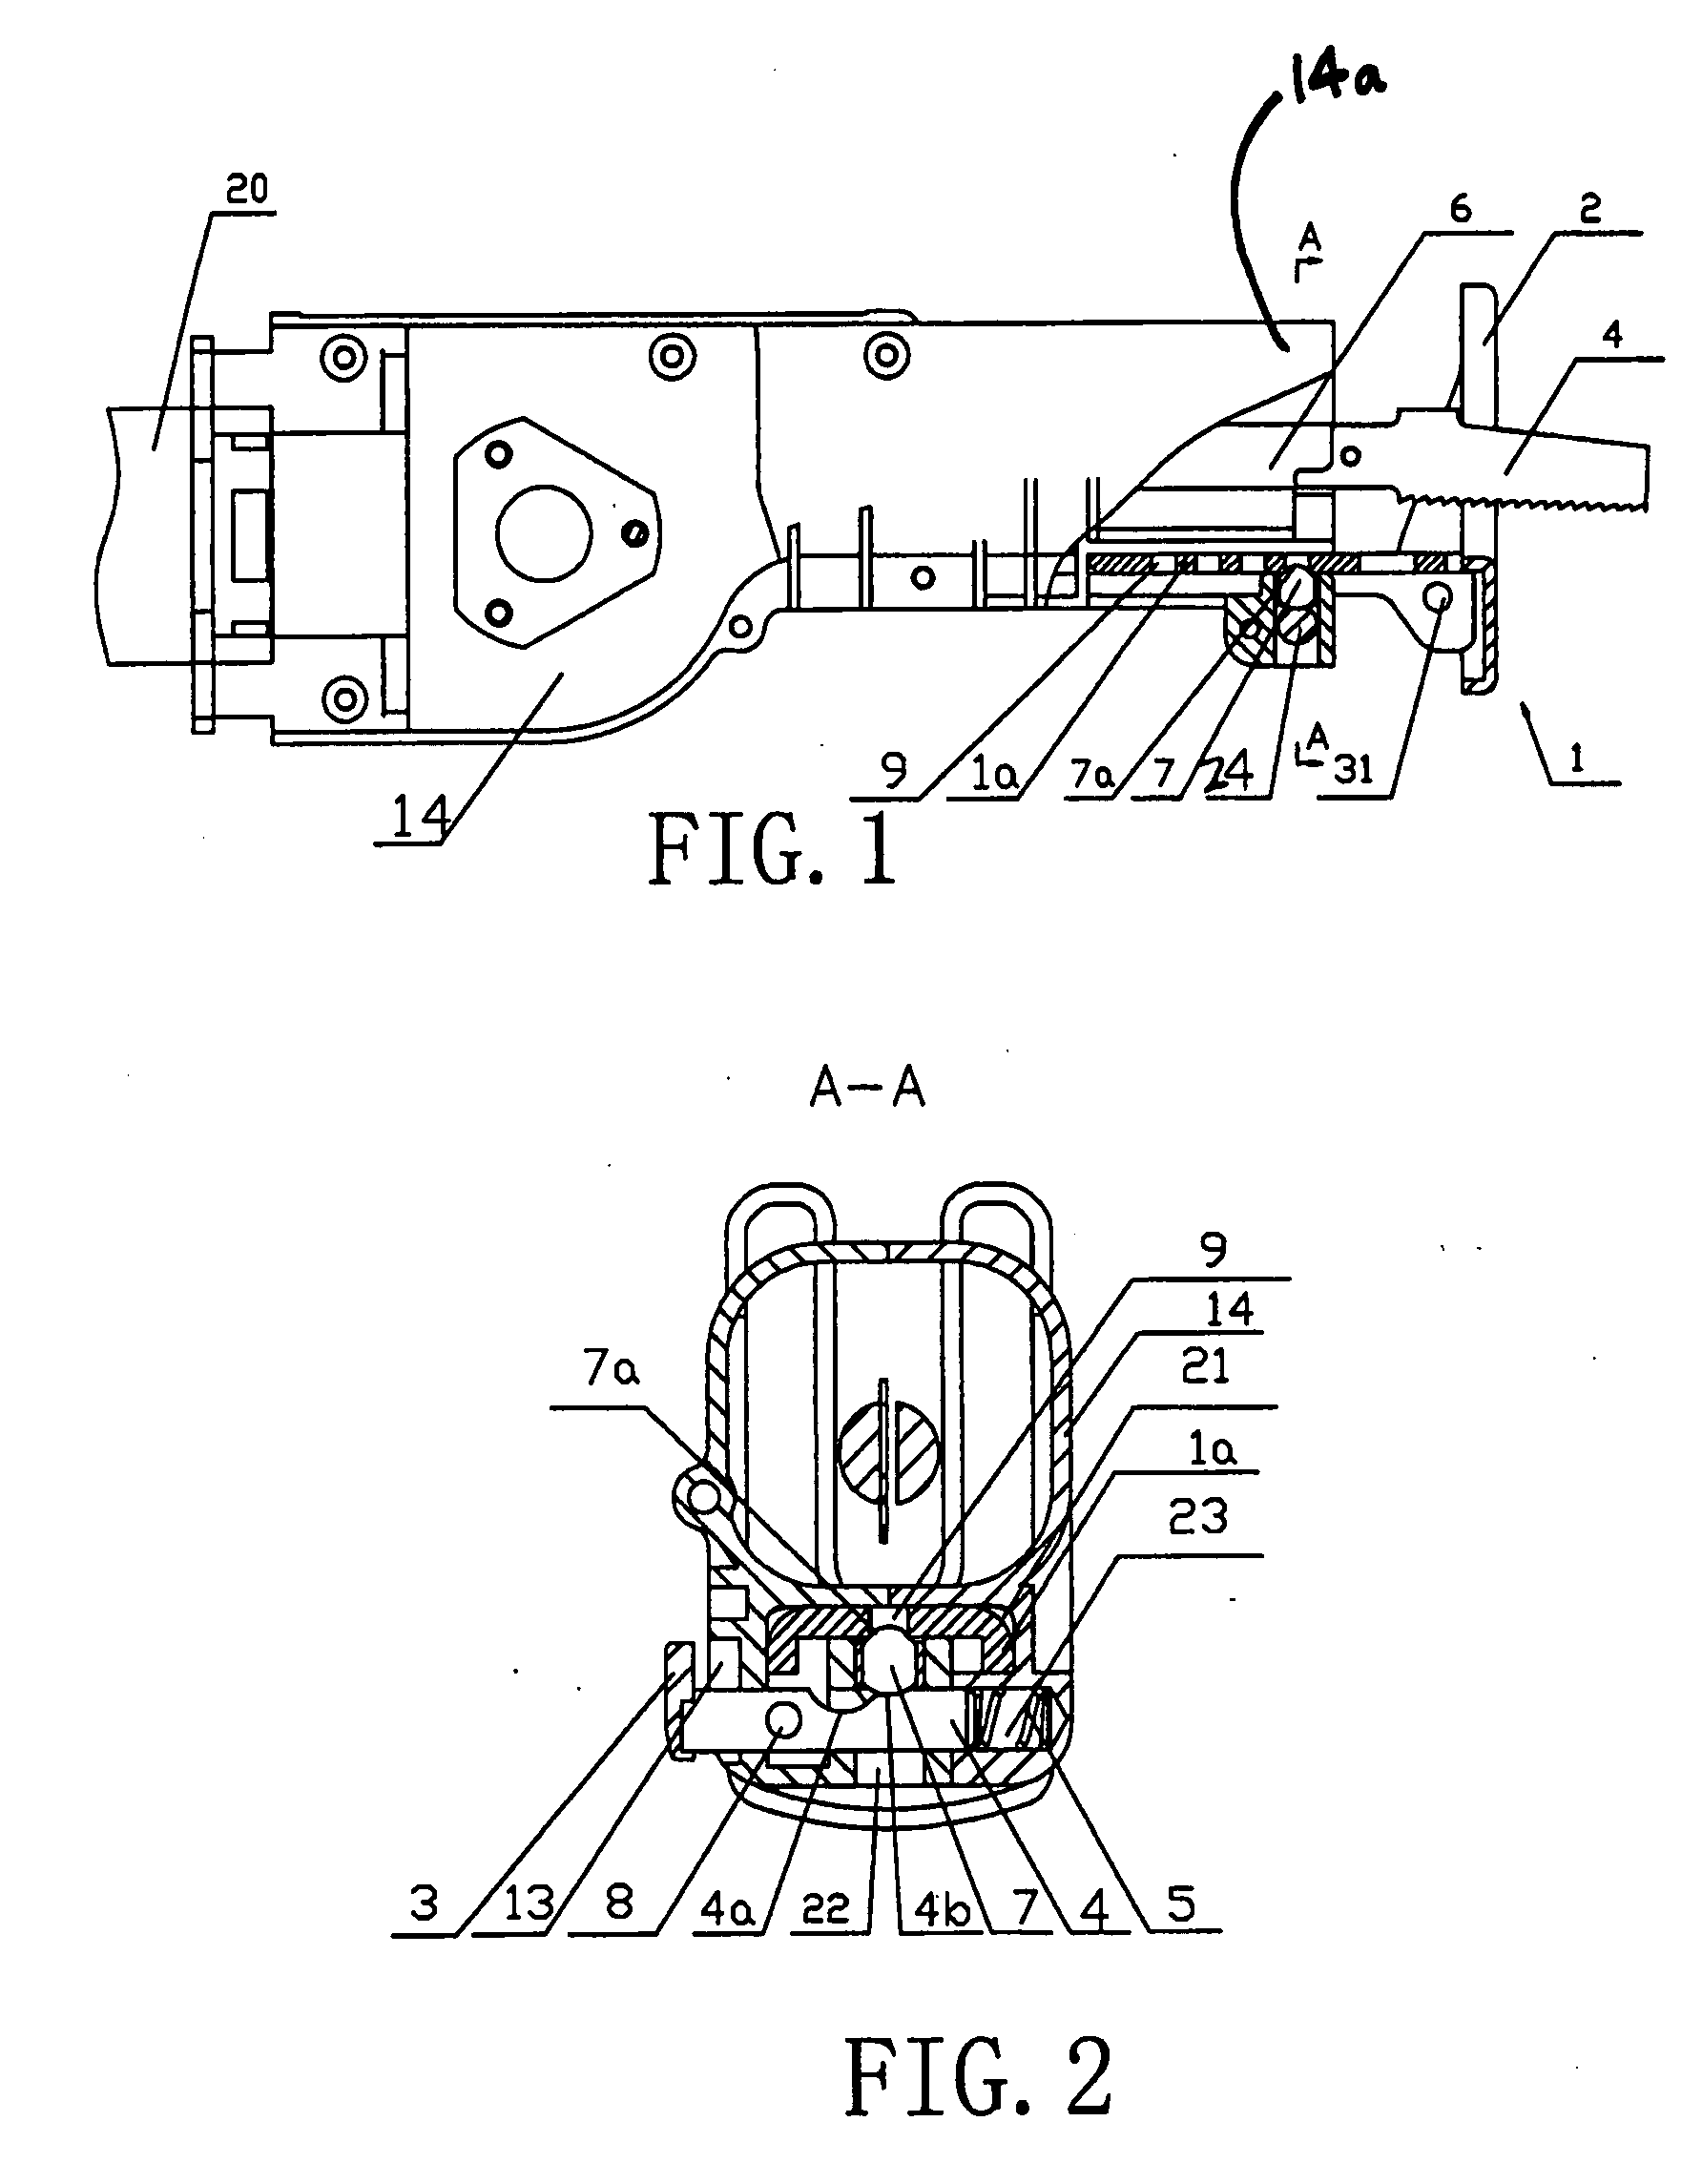 Support shoe for a reciprocating saw